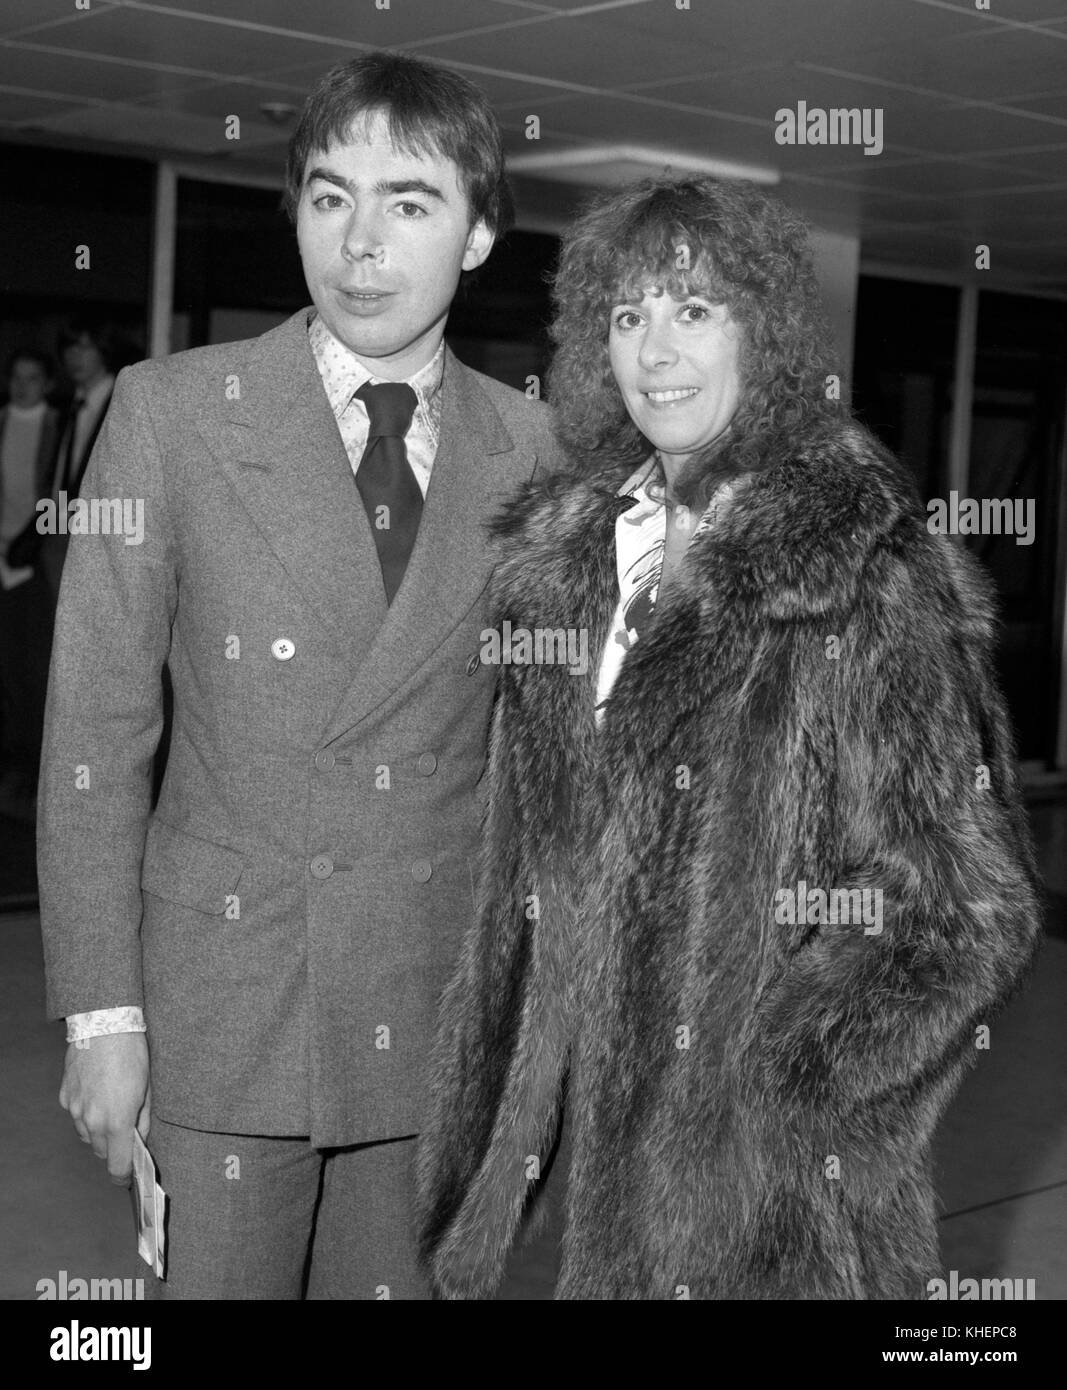 Evita girl Marti Webb alongside Andrew Lloyd Webber at Heathrow Airport in London when they left for Los Angeles to promote Marti's new album, 'Tell Me on a Sunday', which was composed by Lloyd Webber. Stock Photo